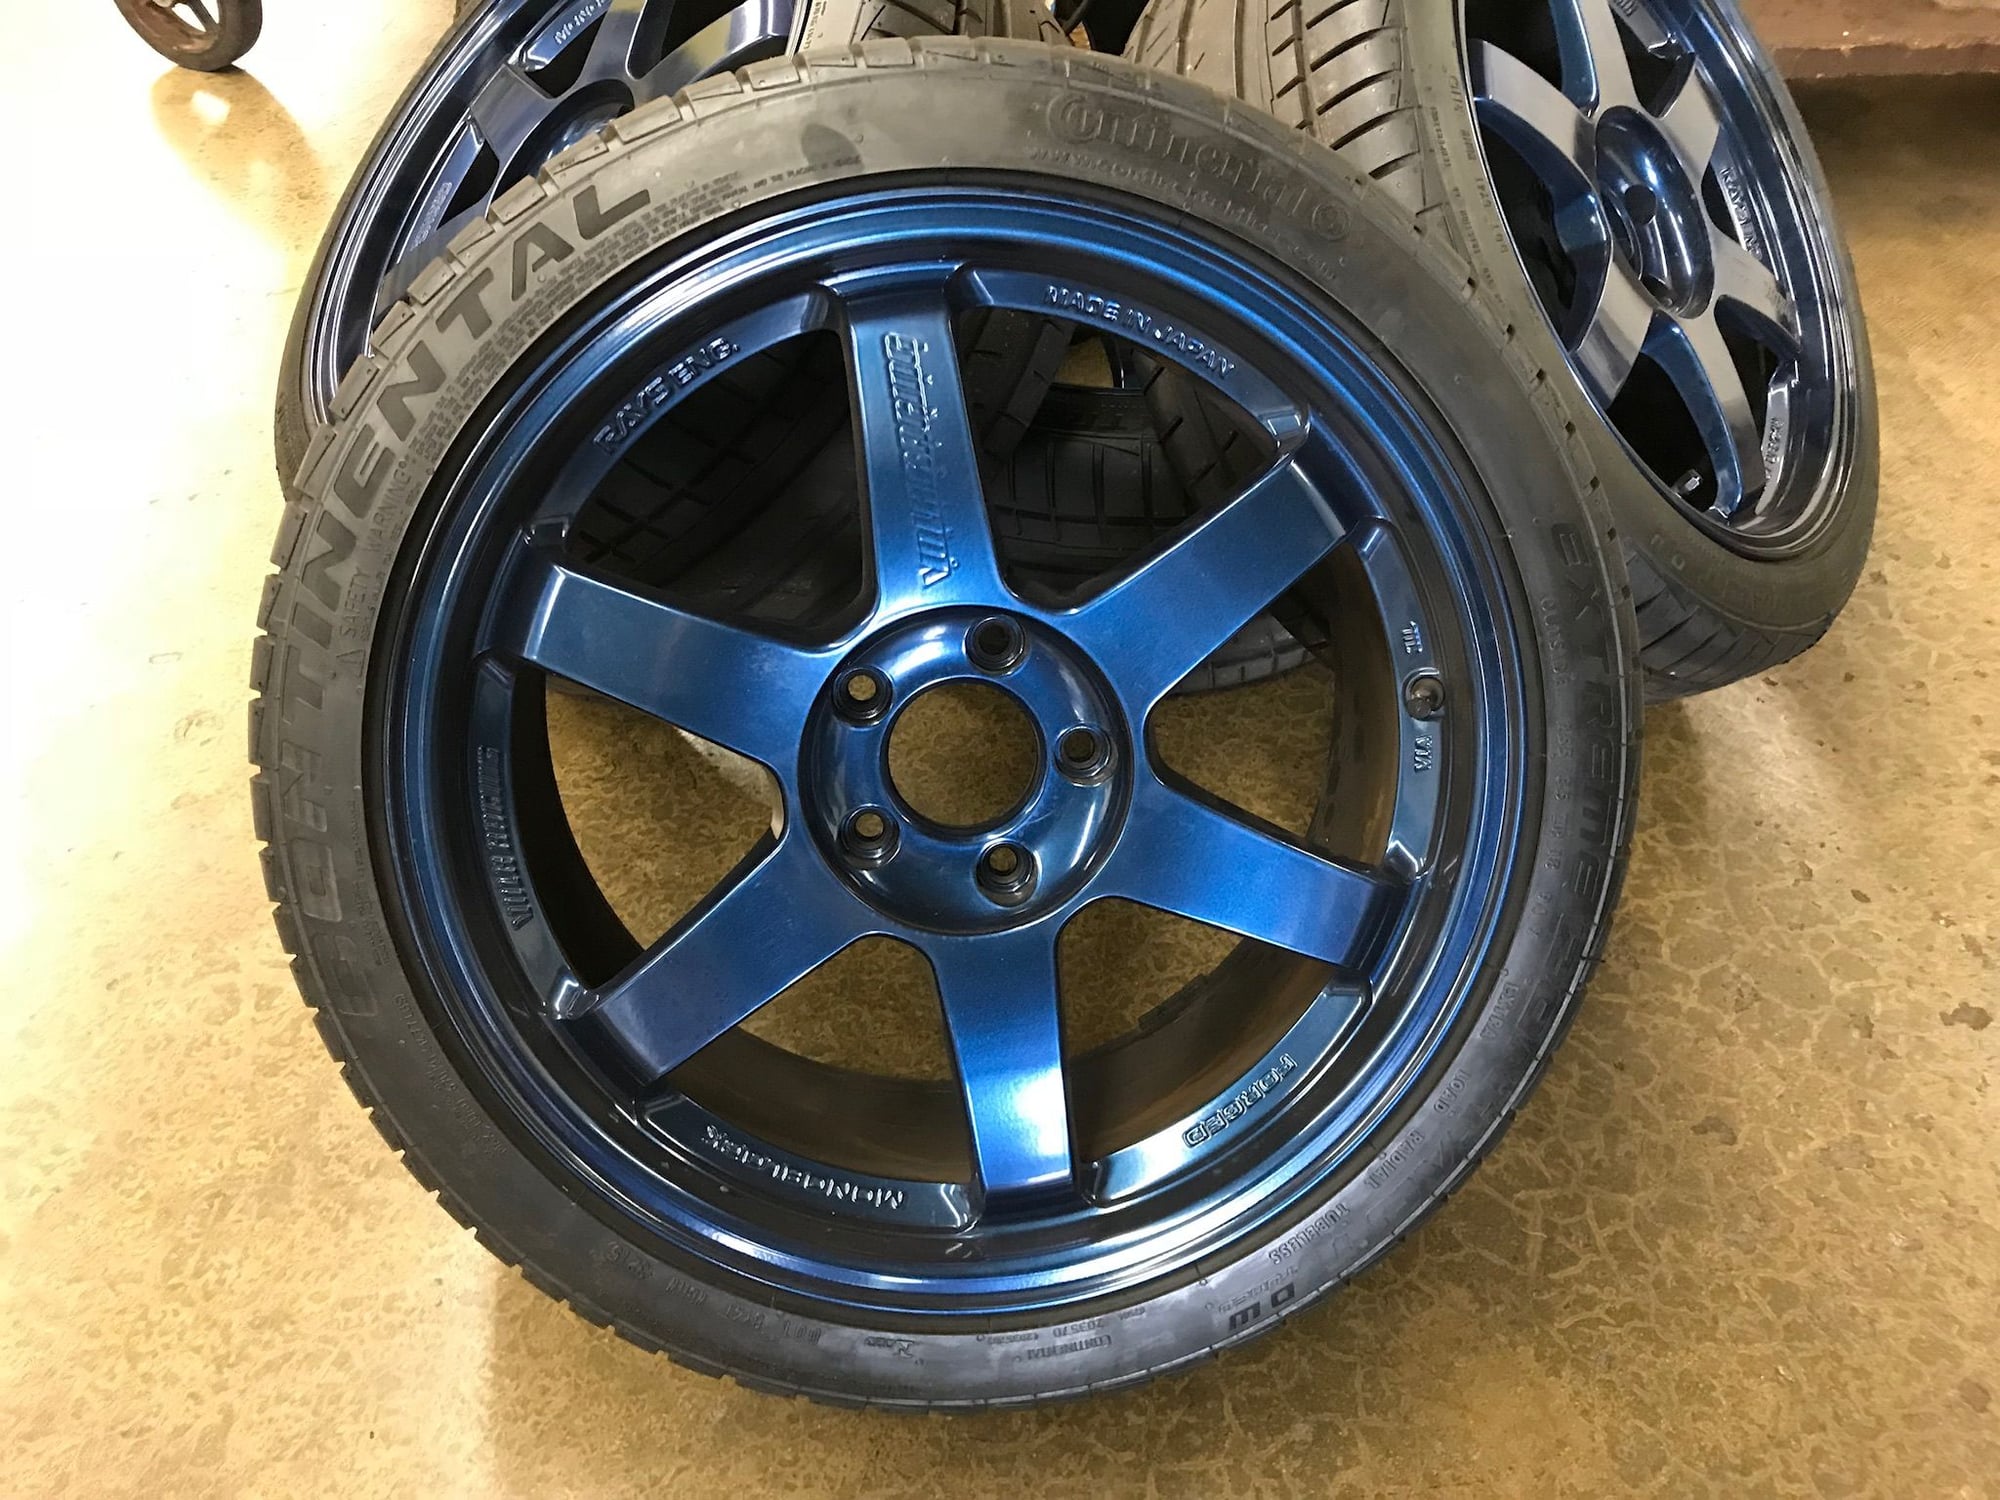 Wheels and Tires/Axles - Rays Volk TE37s - Used - Rockford, IL 61108, United States